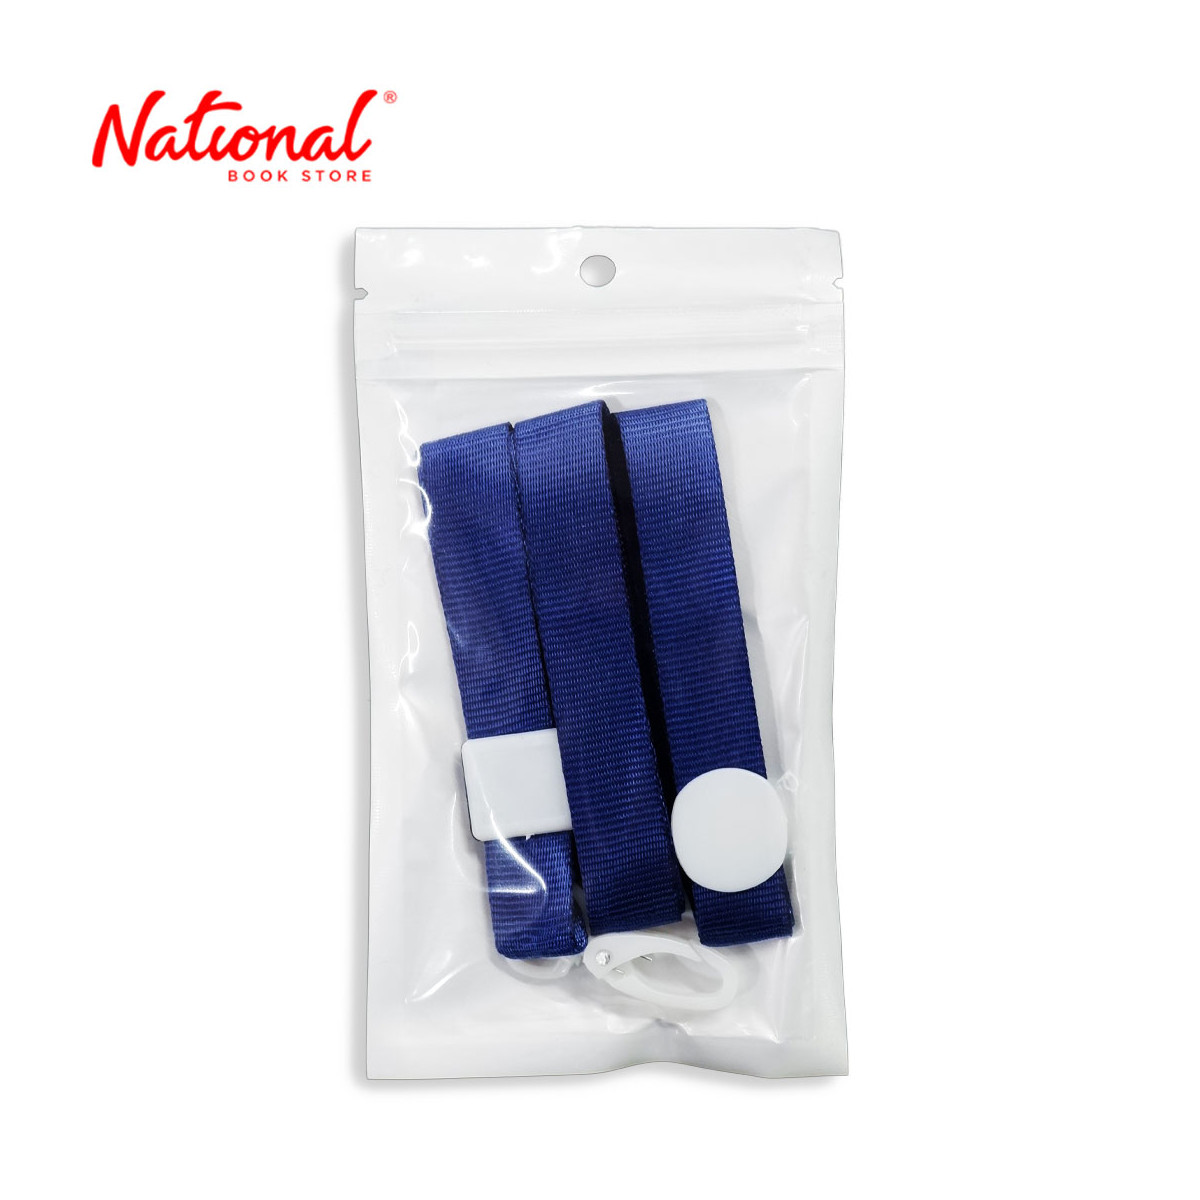 Lanyard with Plastic Hook Navy Blue No. 2 - School & Office Supplies - ID Holder